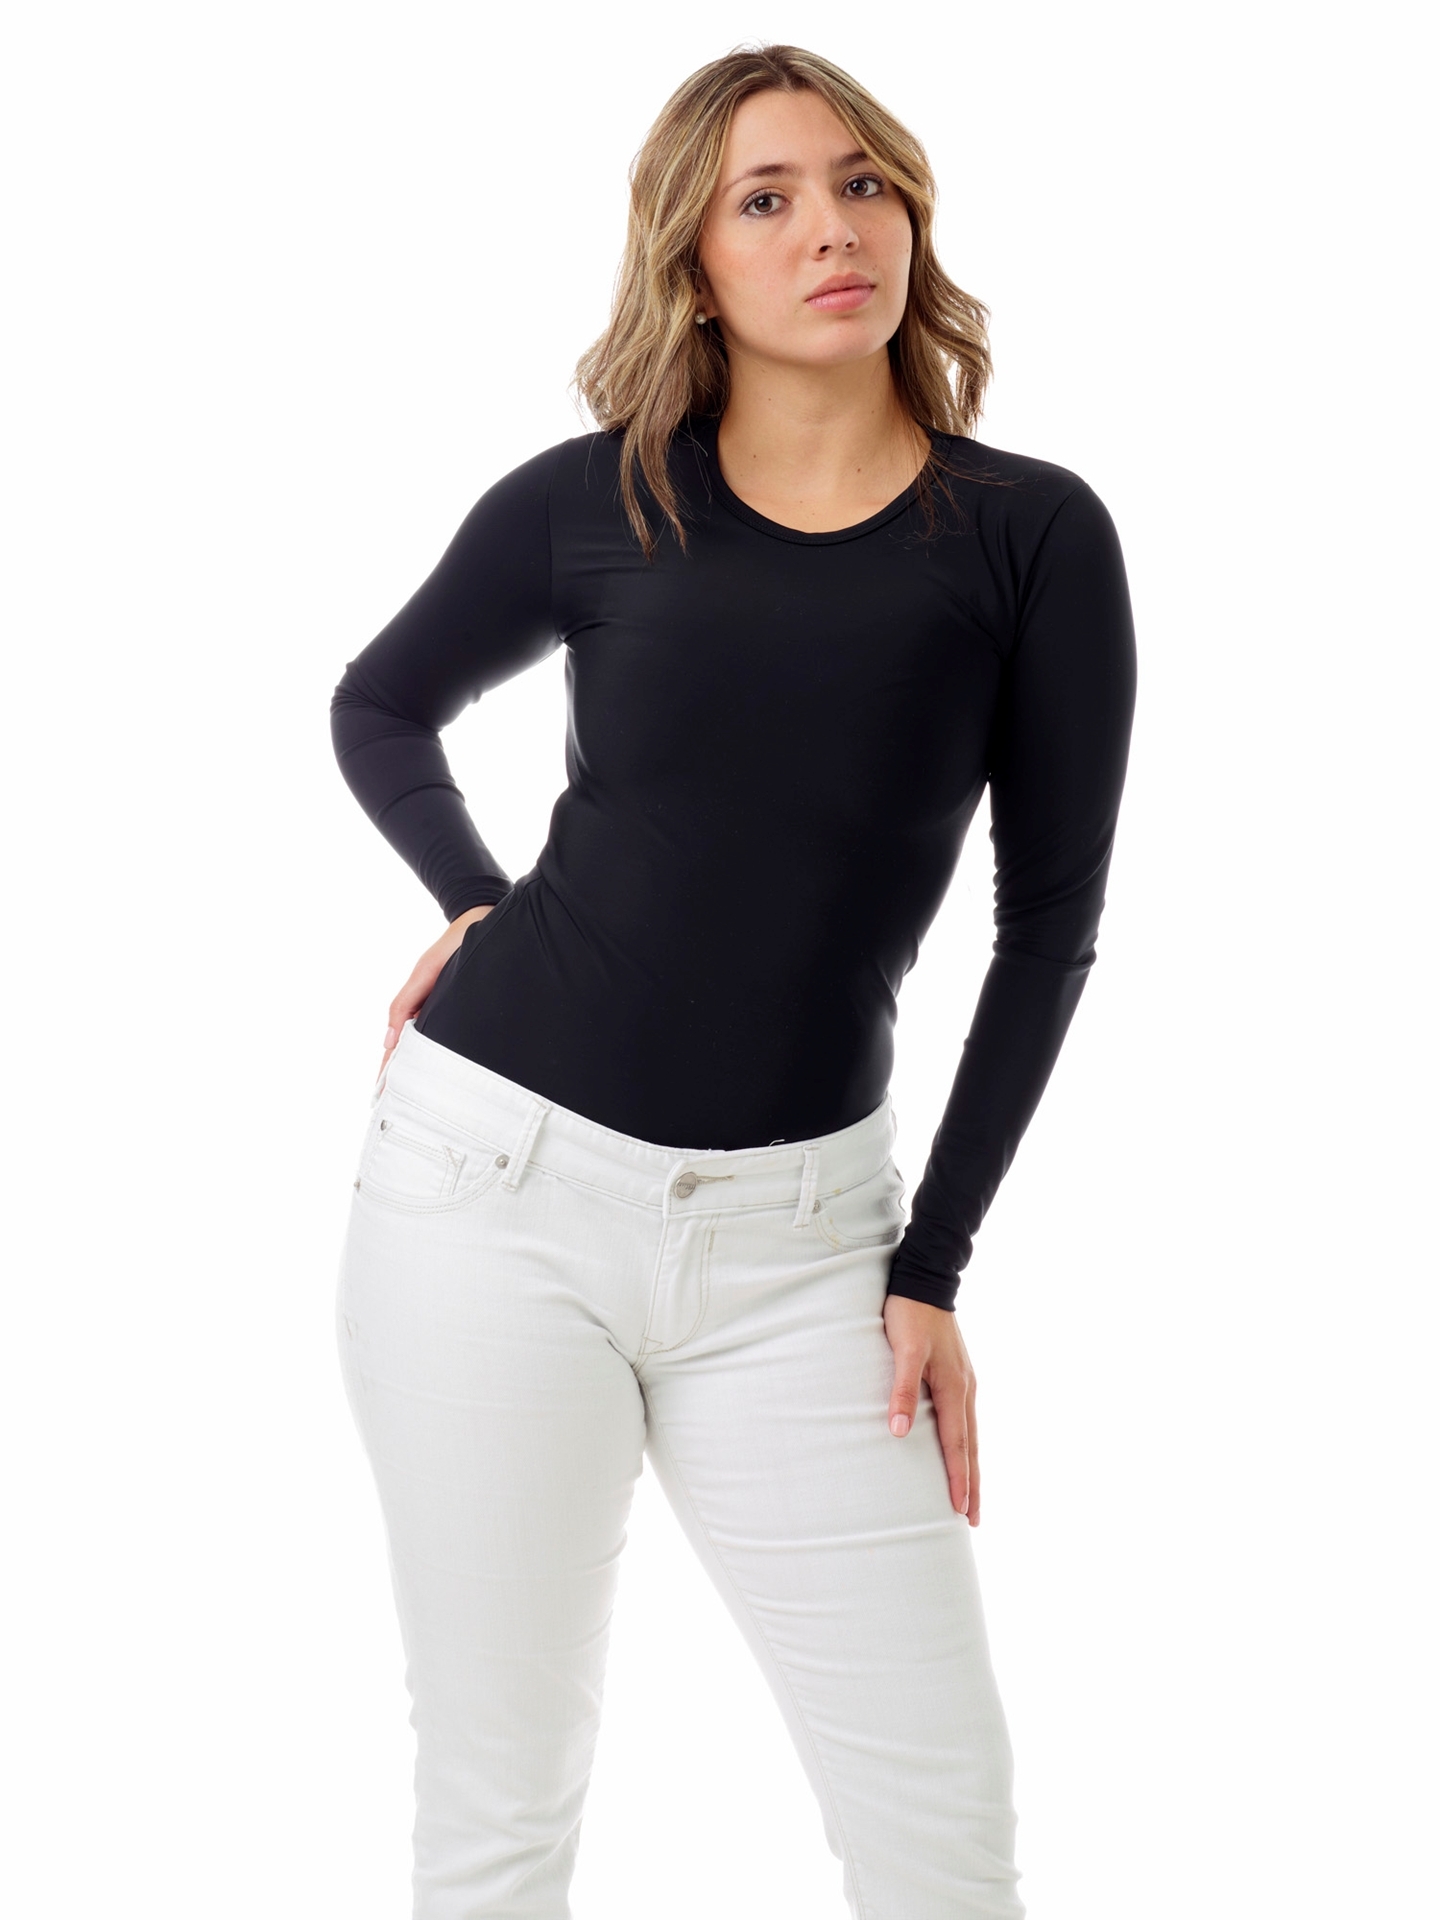 https://www.underworks.com/images/thumbs/0001130_womens-microfiber-compression-crew-neck-top-long-sleeve.jpeg